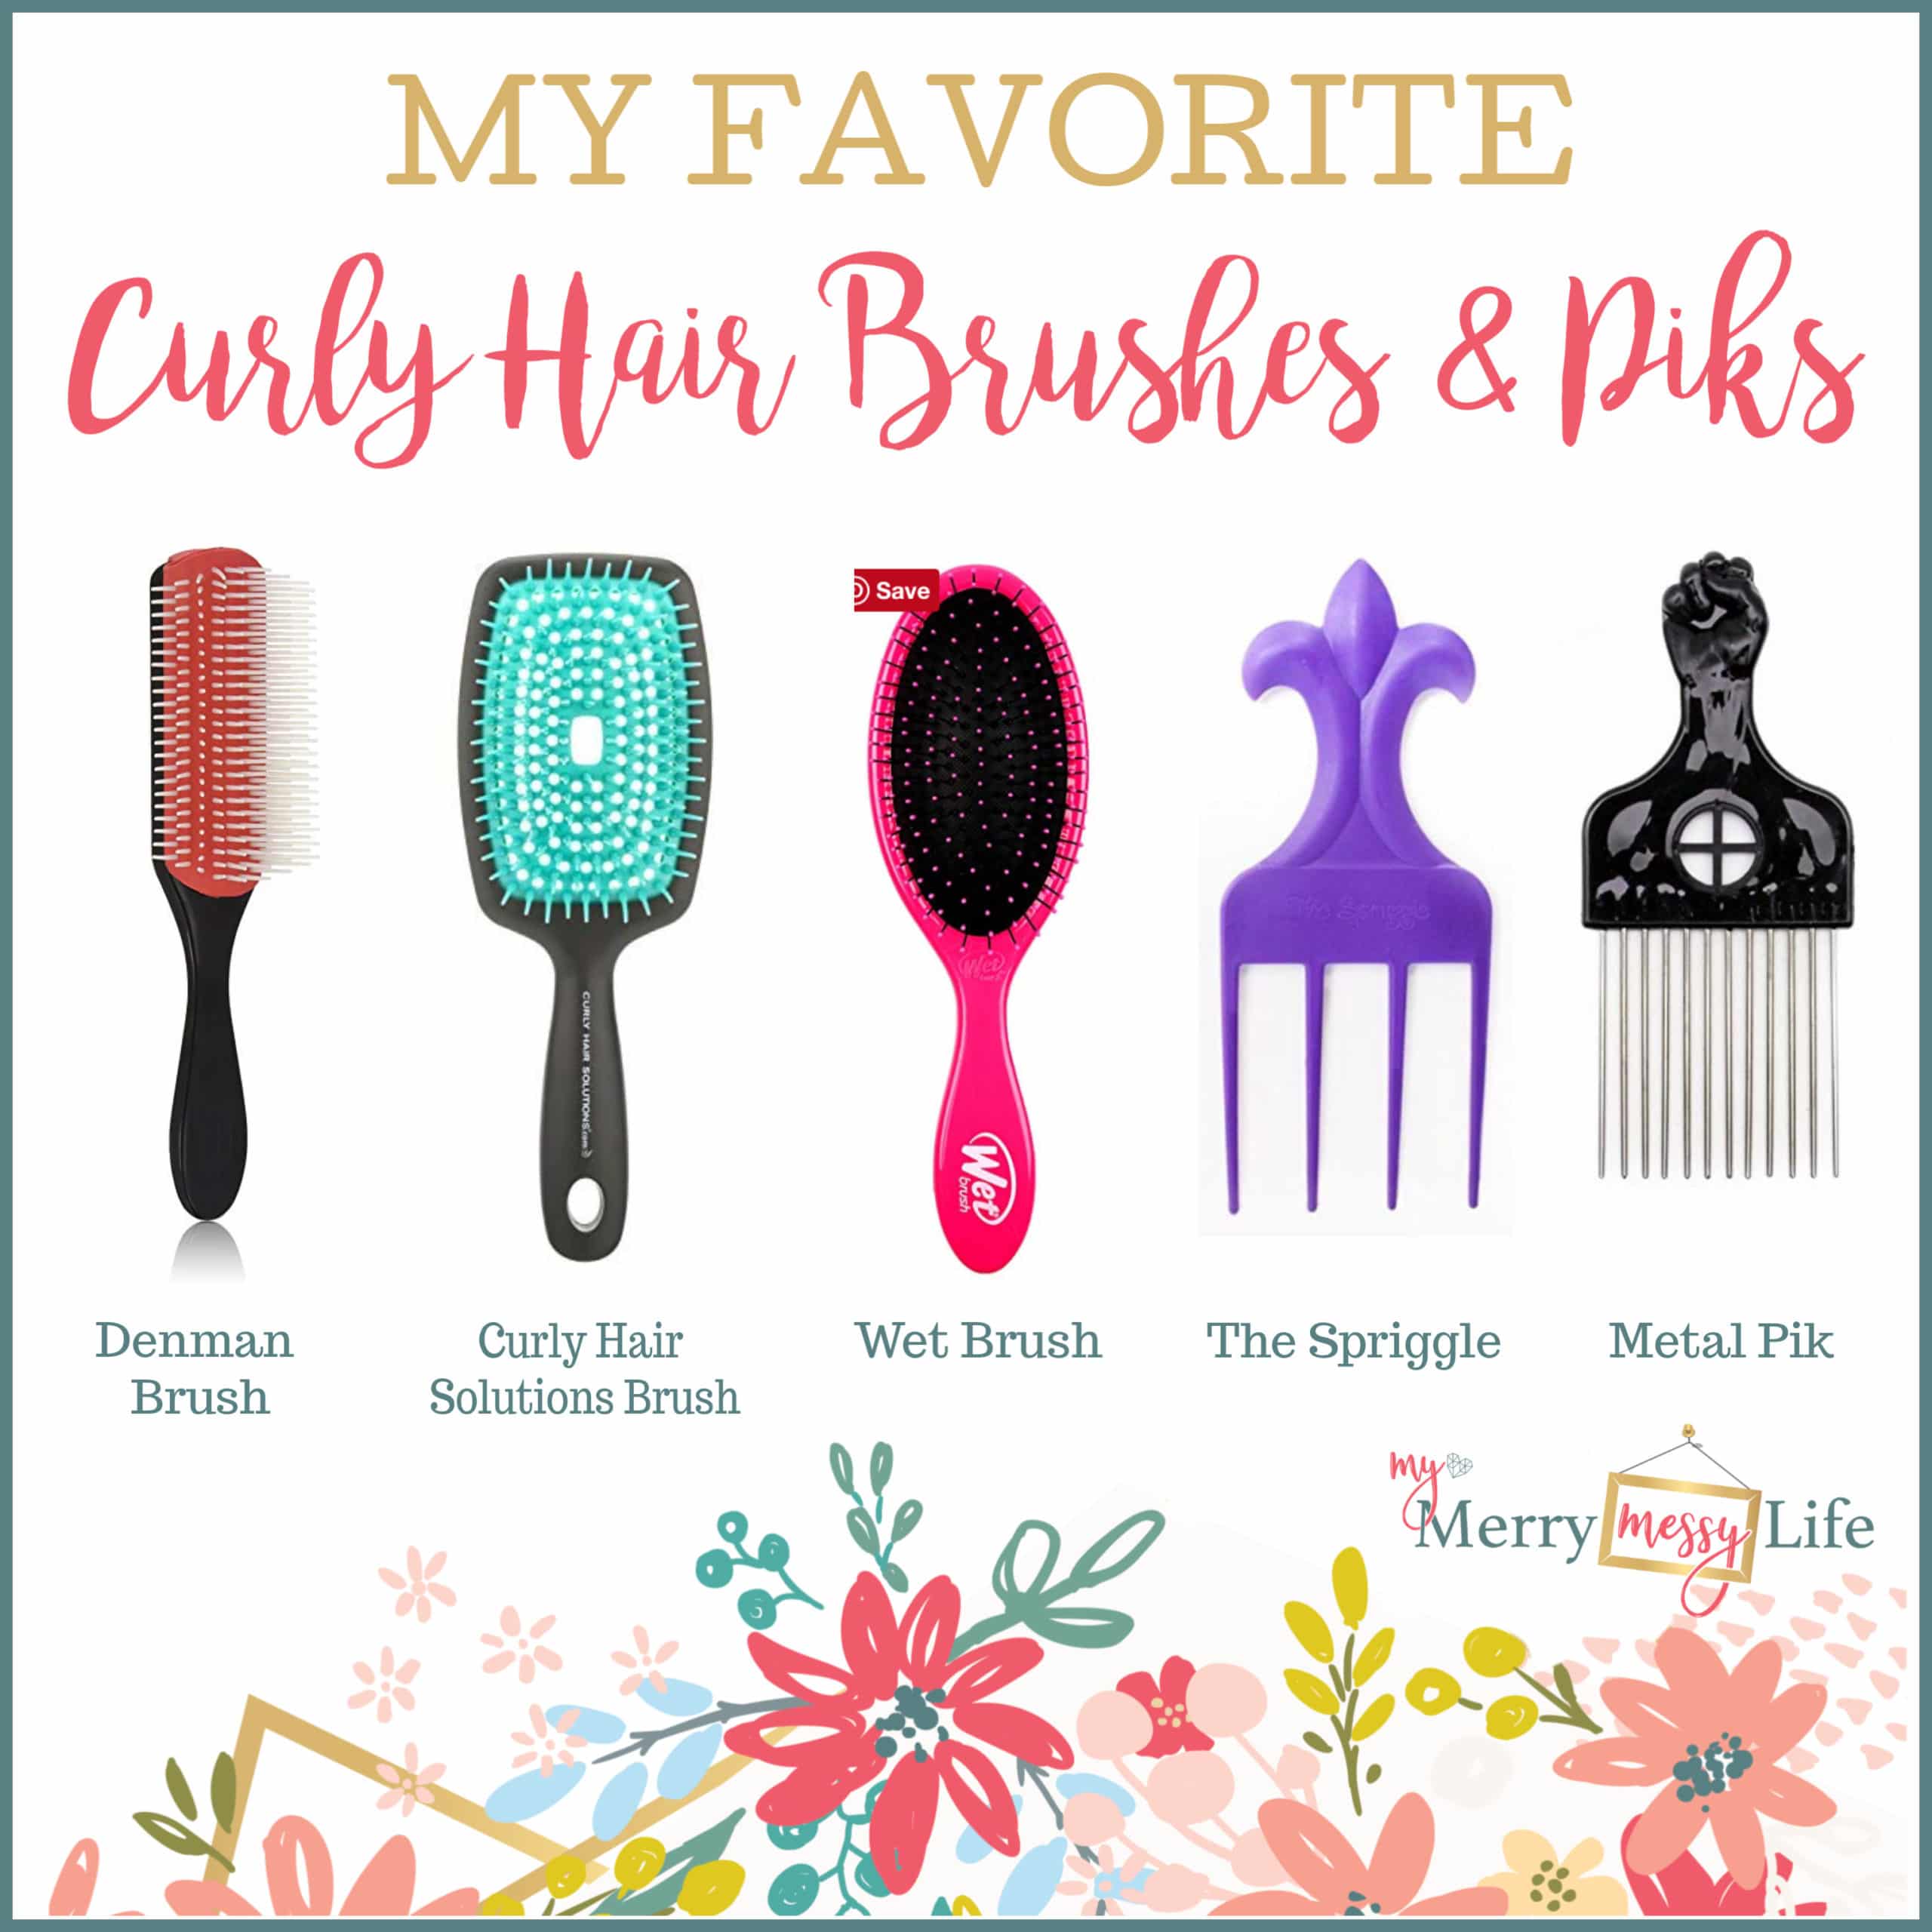 My favorite Curly Hair Brushes and Piks - the Denman Brush, Curly Hair Solutions Flexy Brush, Wet Brush, the Spriggle, and a metal pik